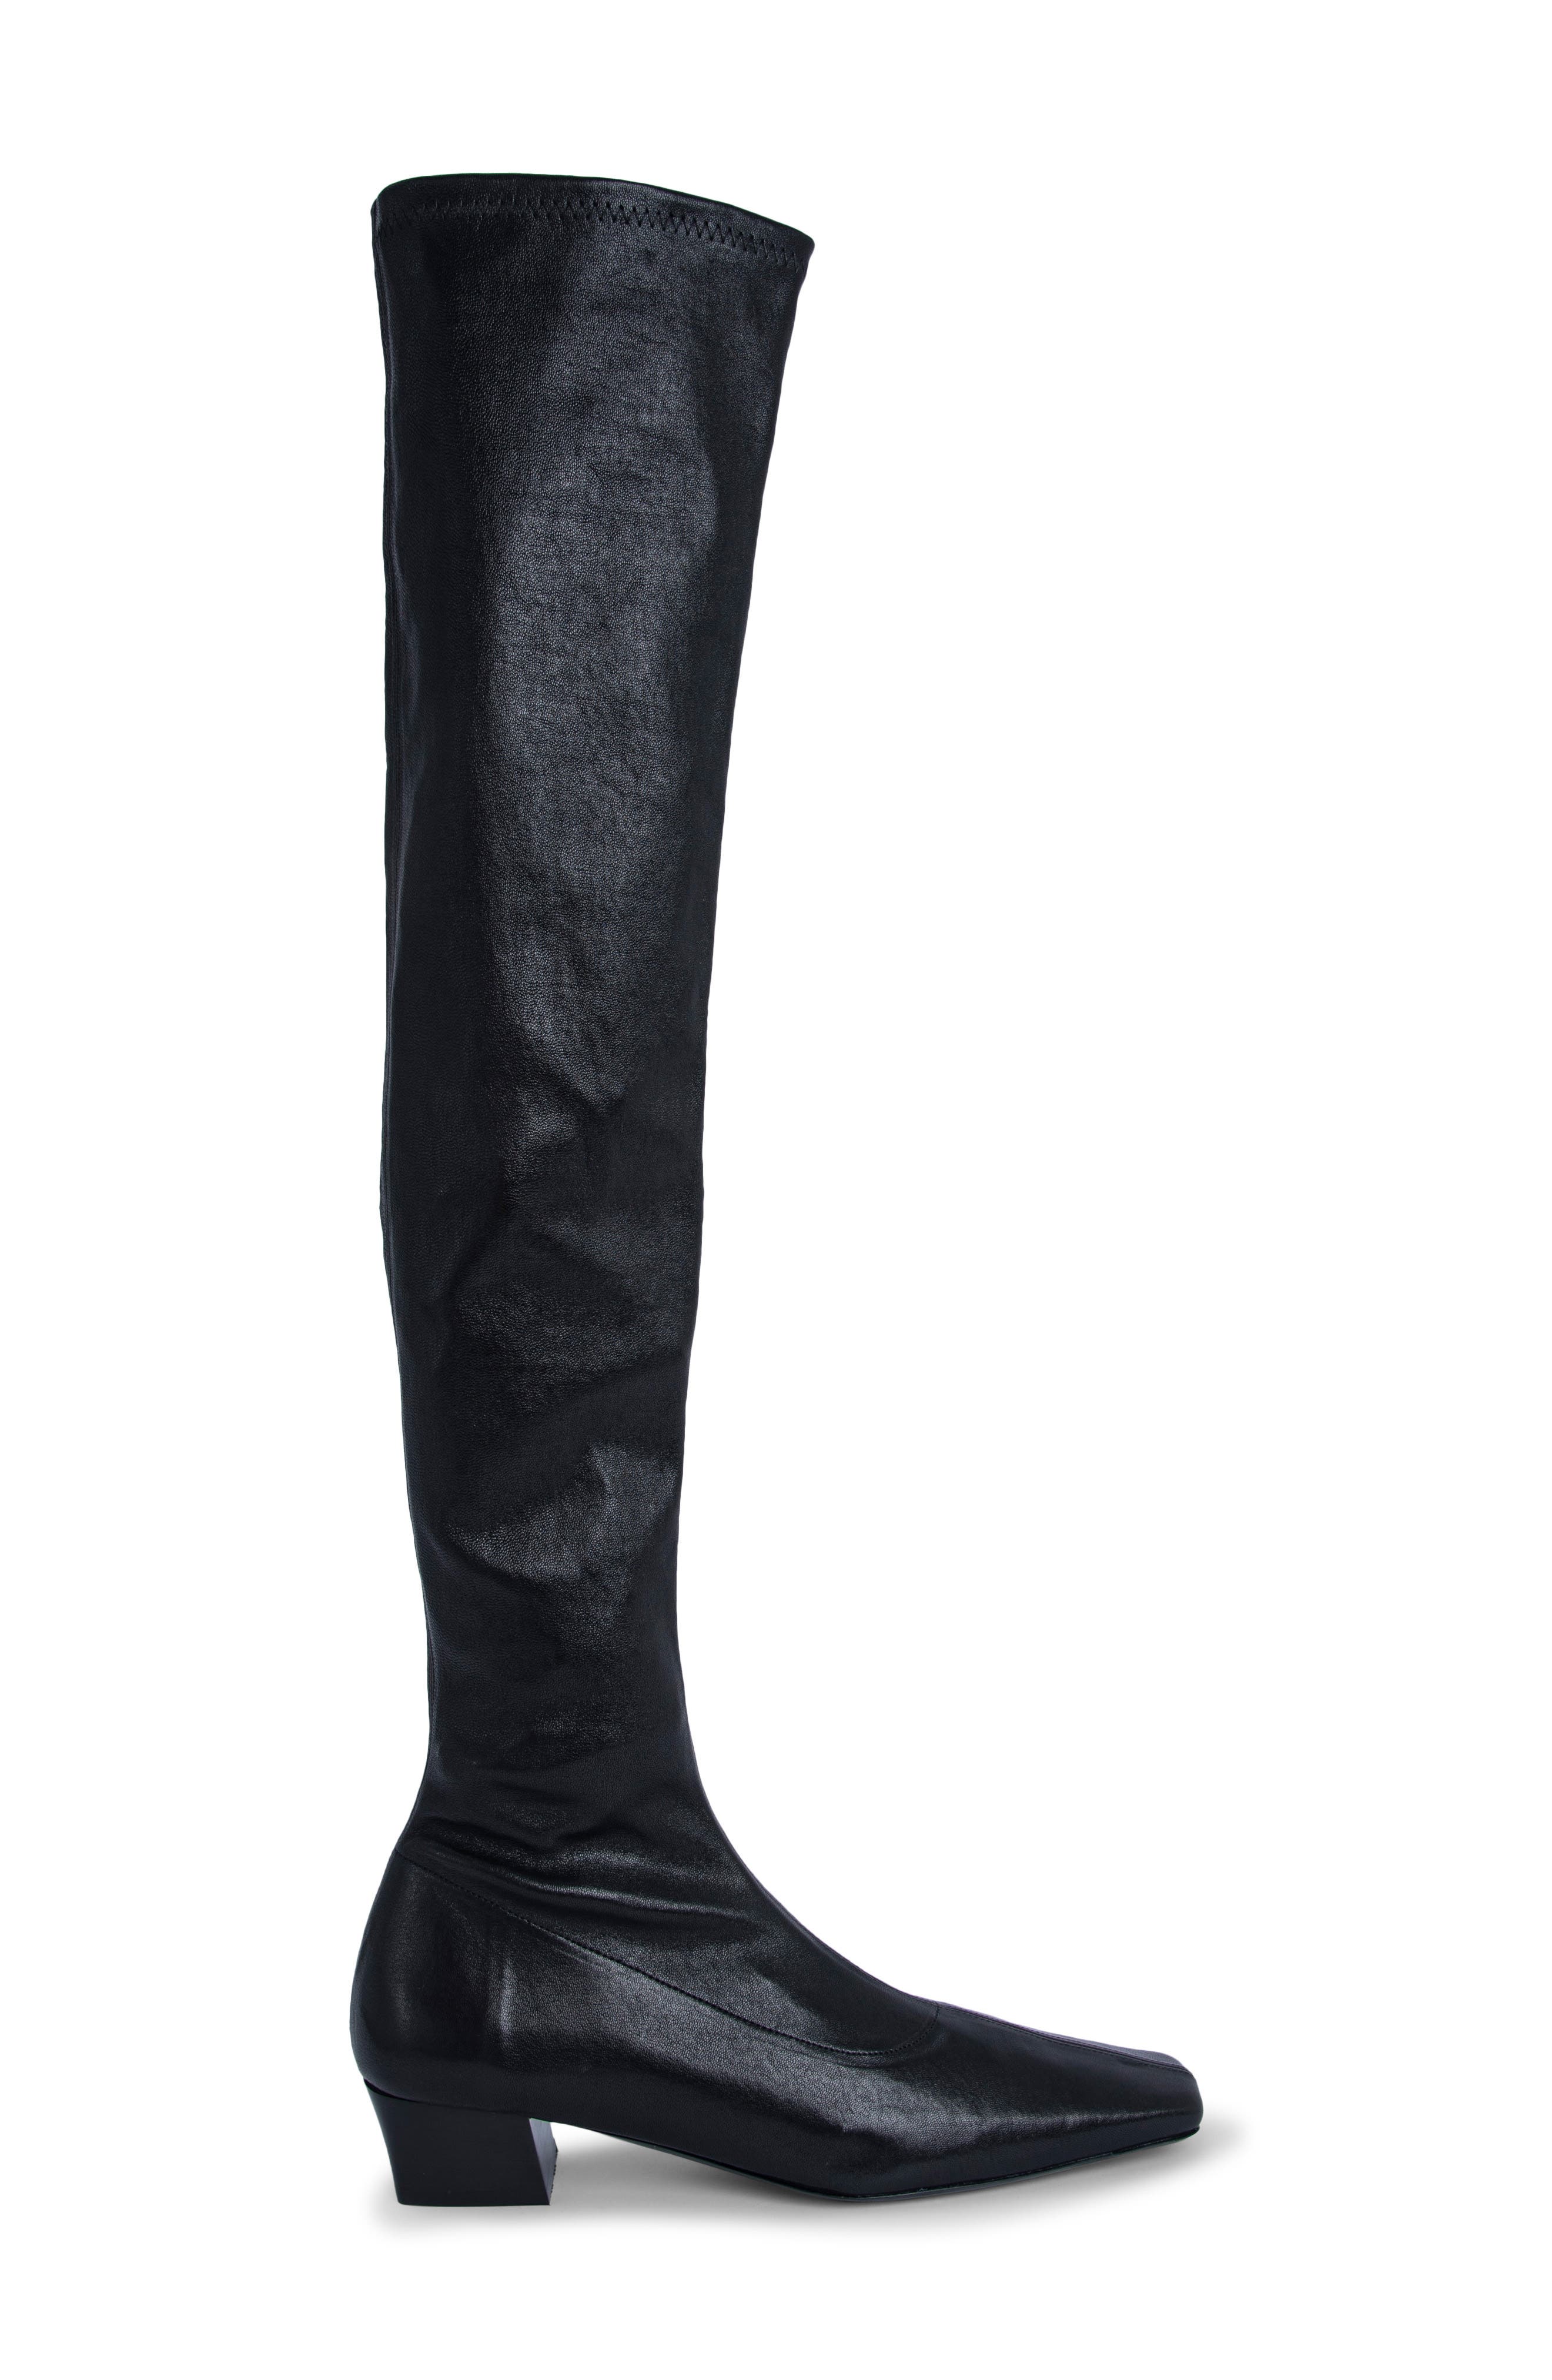 By Far Collette Block Heel Tall Boot in Black at Nordstrom, Size 10Us